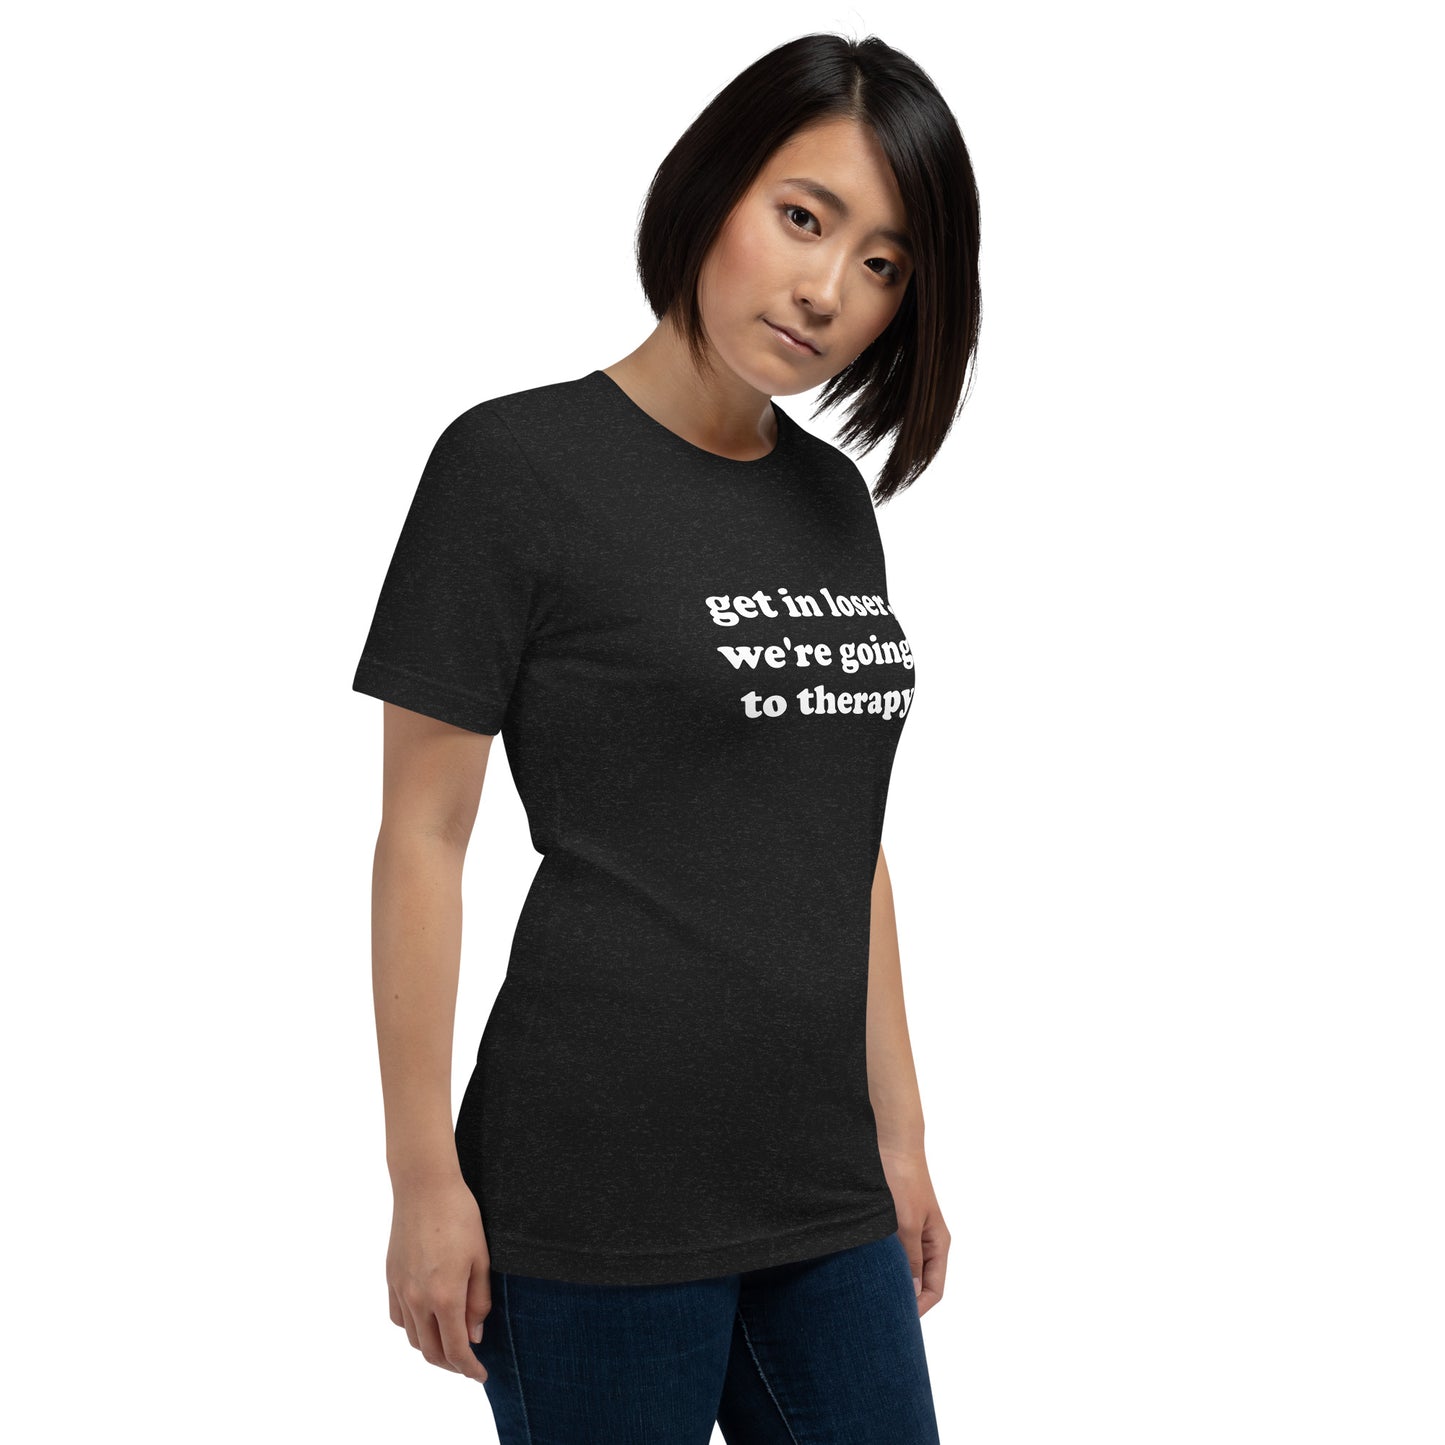 Get In Loser, We're Going to Therapy T-shirt *Multiple Colors*